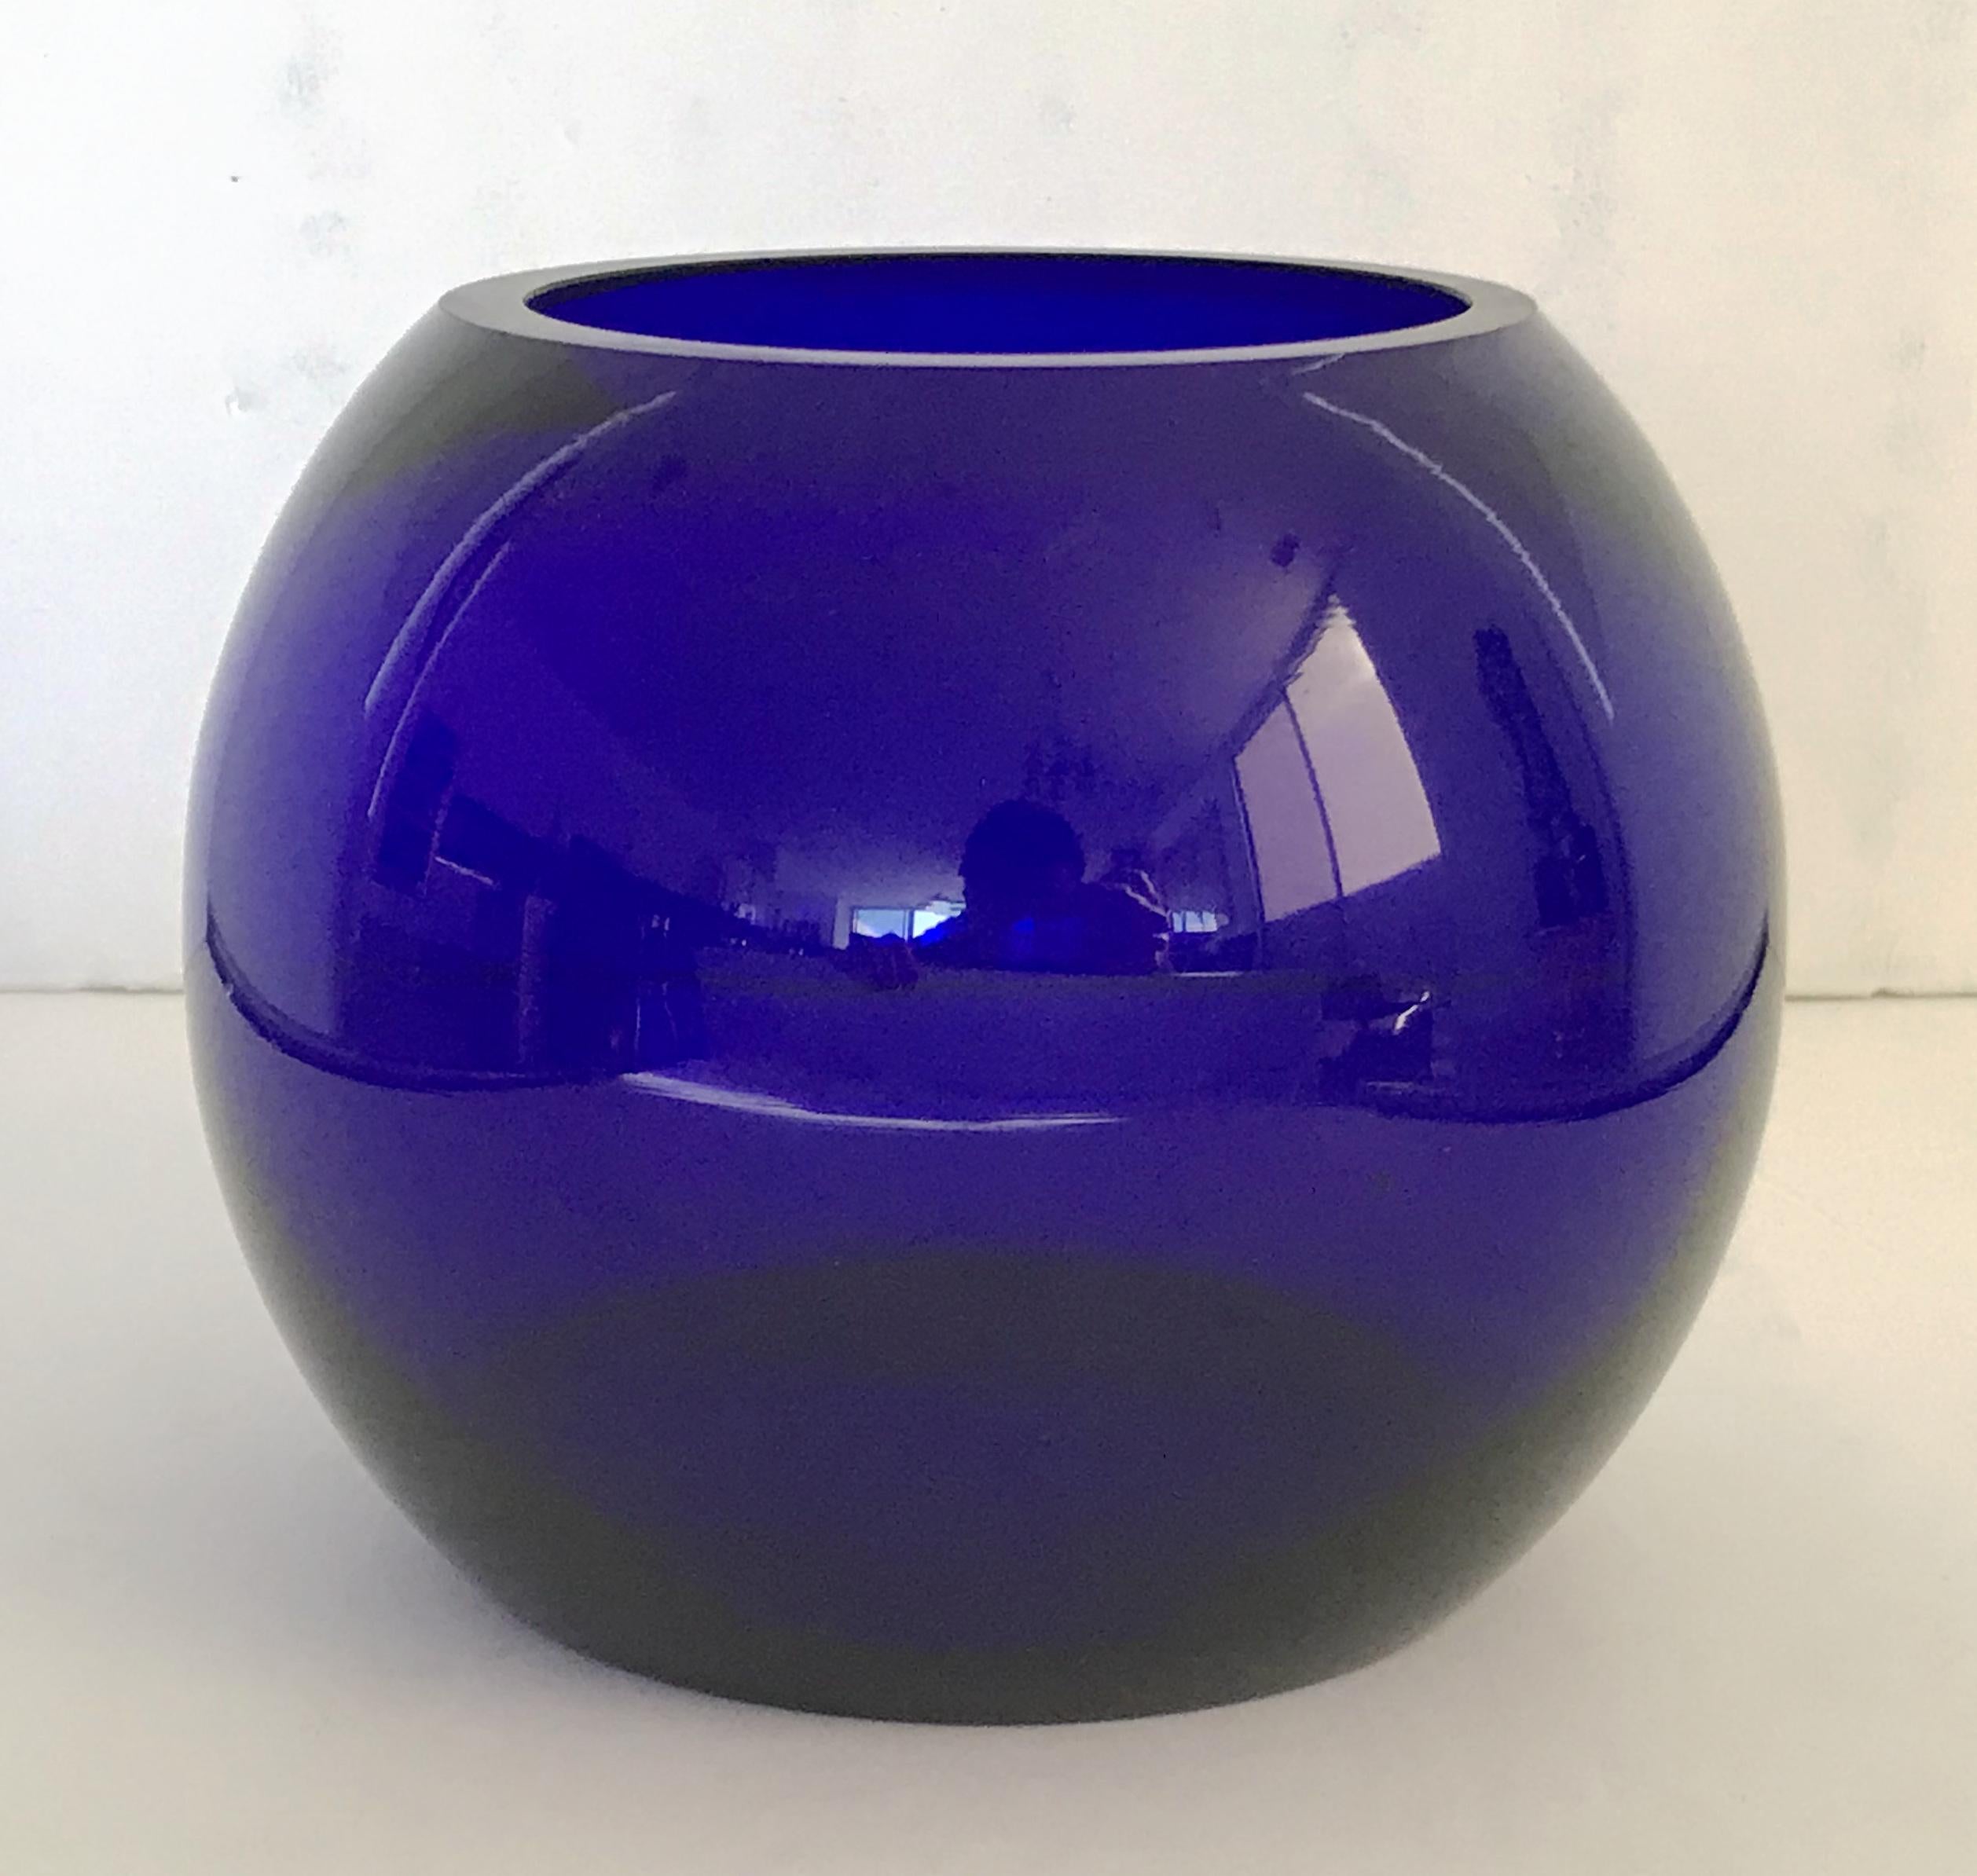 Italian dark blue Murano glass bowl / Made in Italy, circa 1960s
Measures: diameter 6 inches, height 5 inches, opening 3.5 inches
1 in stock in Palm Springs ON 50% OFF SALE for $199 !!
Order Reference #: FABIOLTD G175
This piece makes for great and